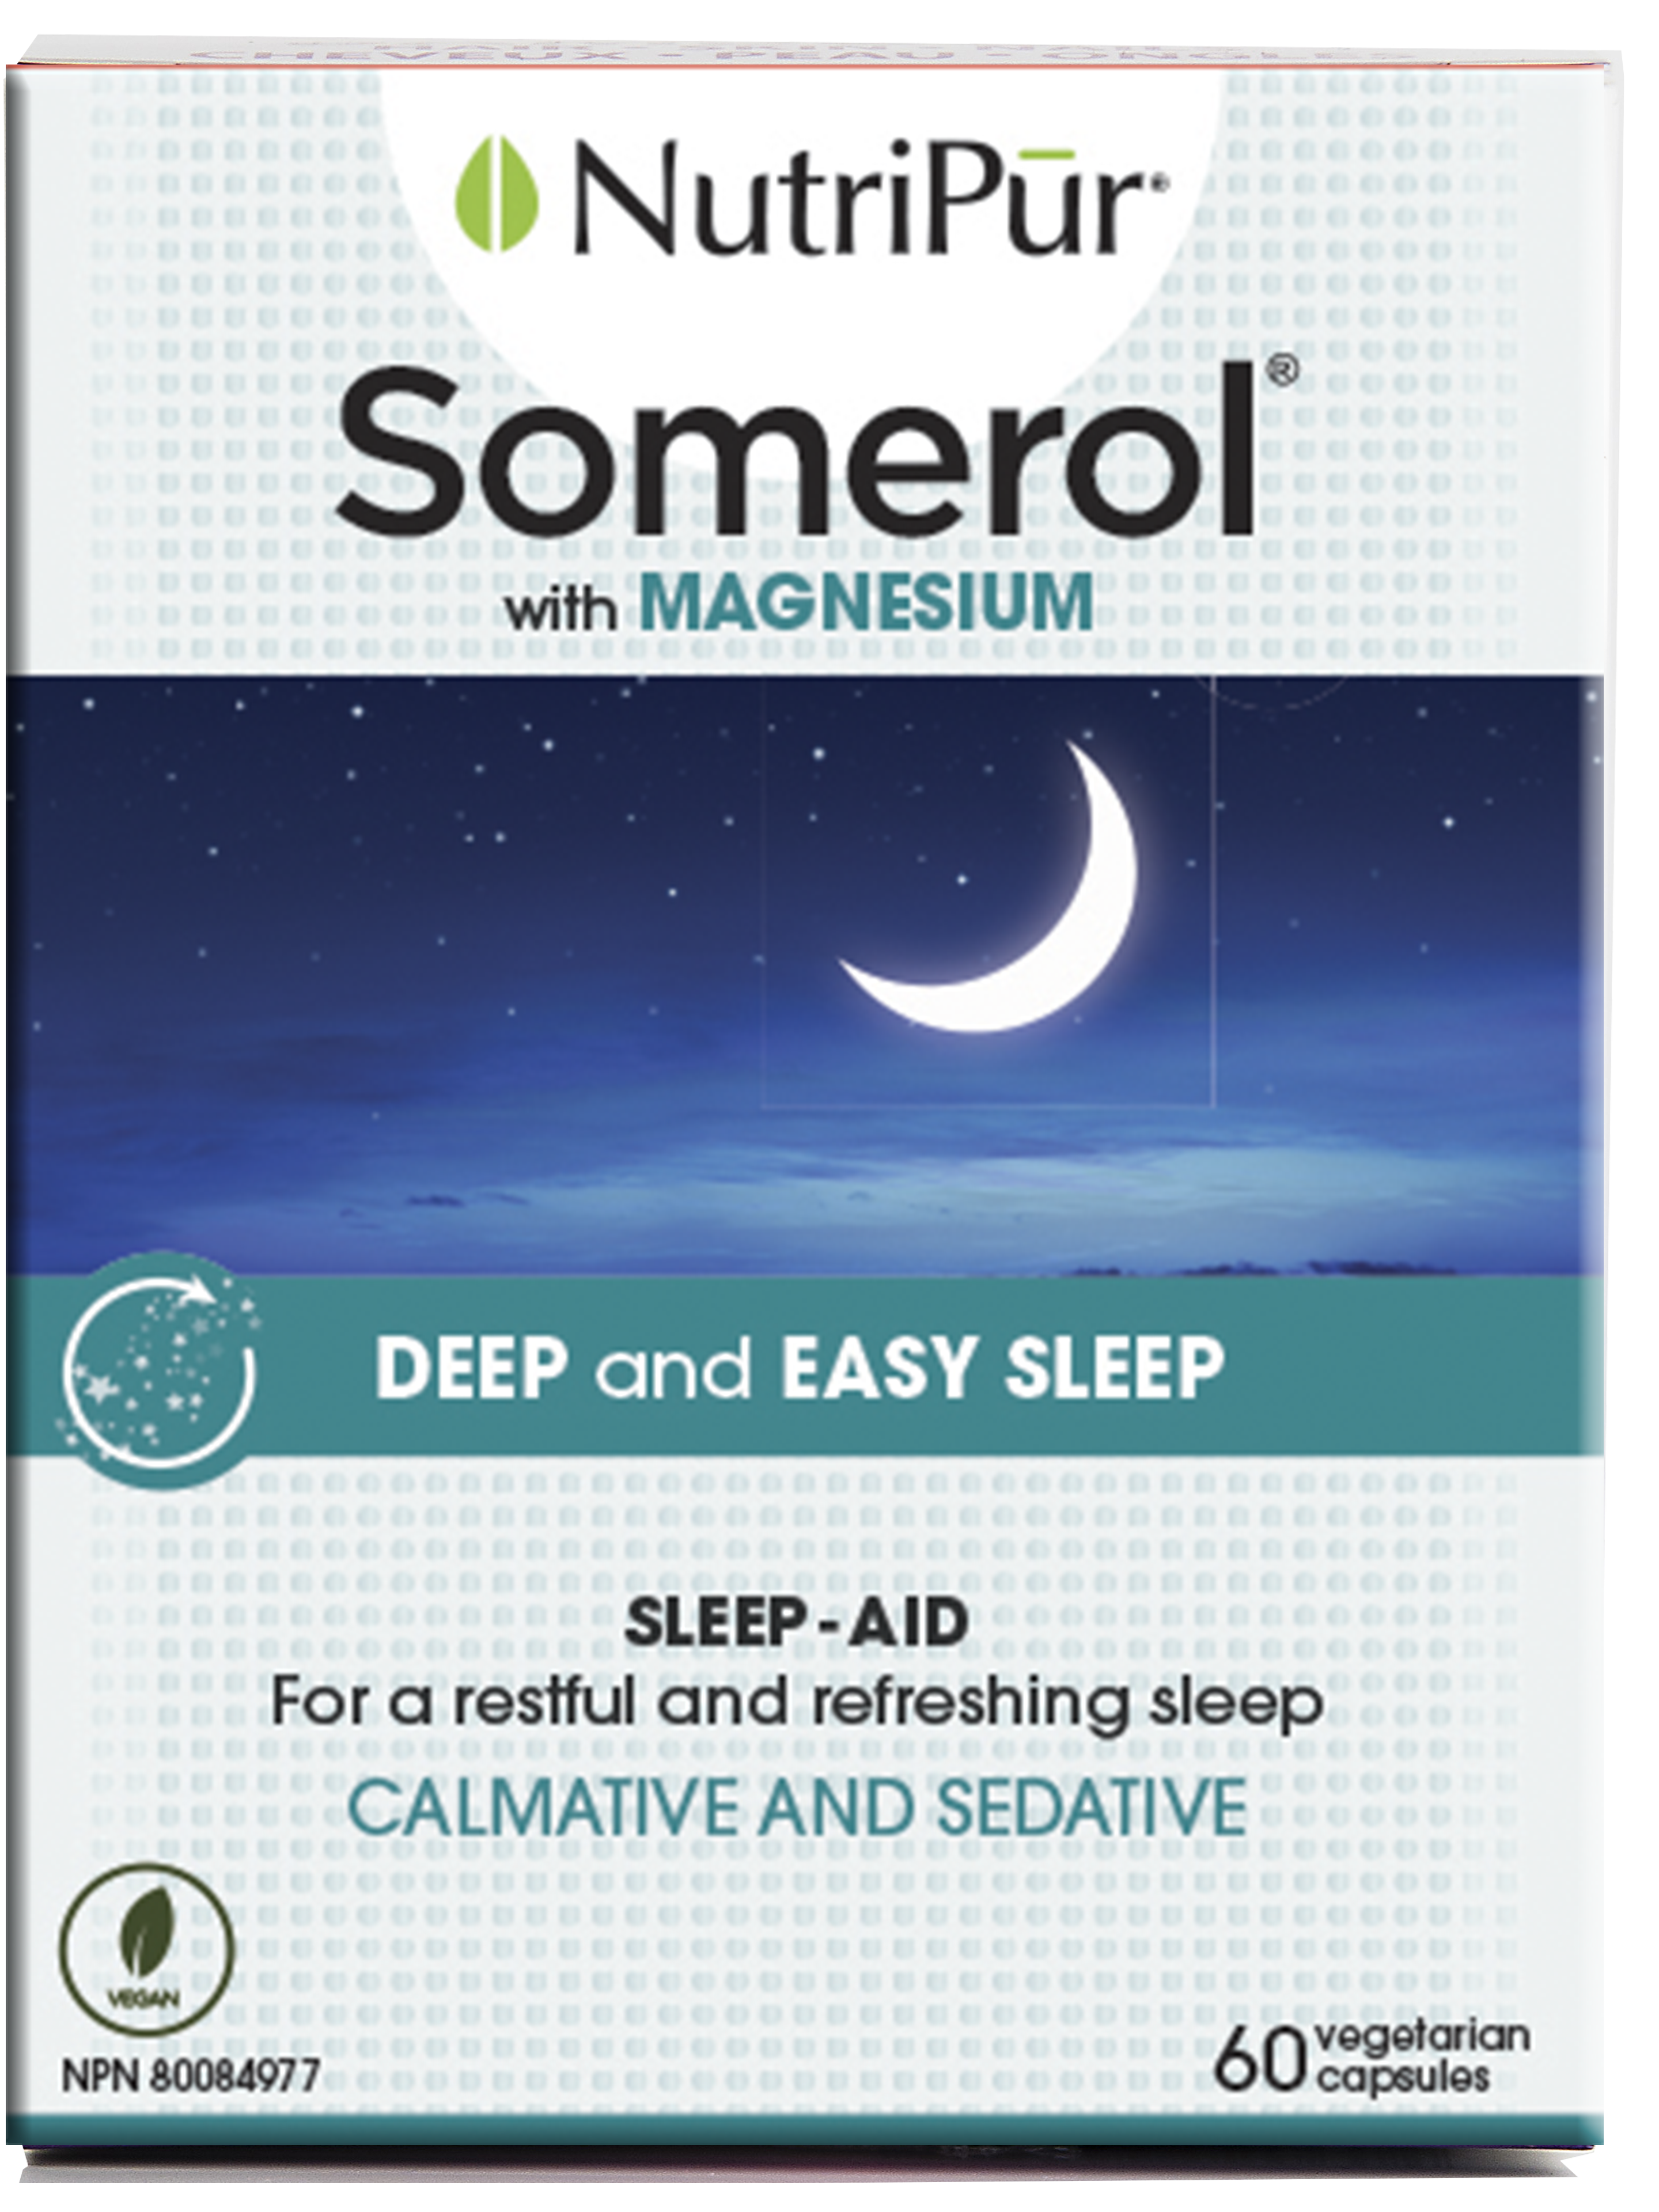 Nutripur Somerol - Anguish causing insomnia, Difficulty to fall asleep, Frequent waking, Insomnia, Irritability, Nervousness, Nocturnal agitation, Light sleep. - Ebambu.ca natural health product store - free shipping <59$ 